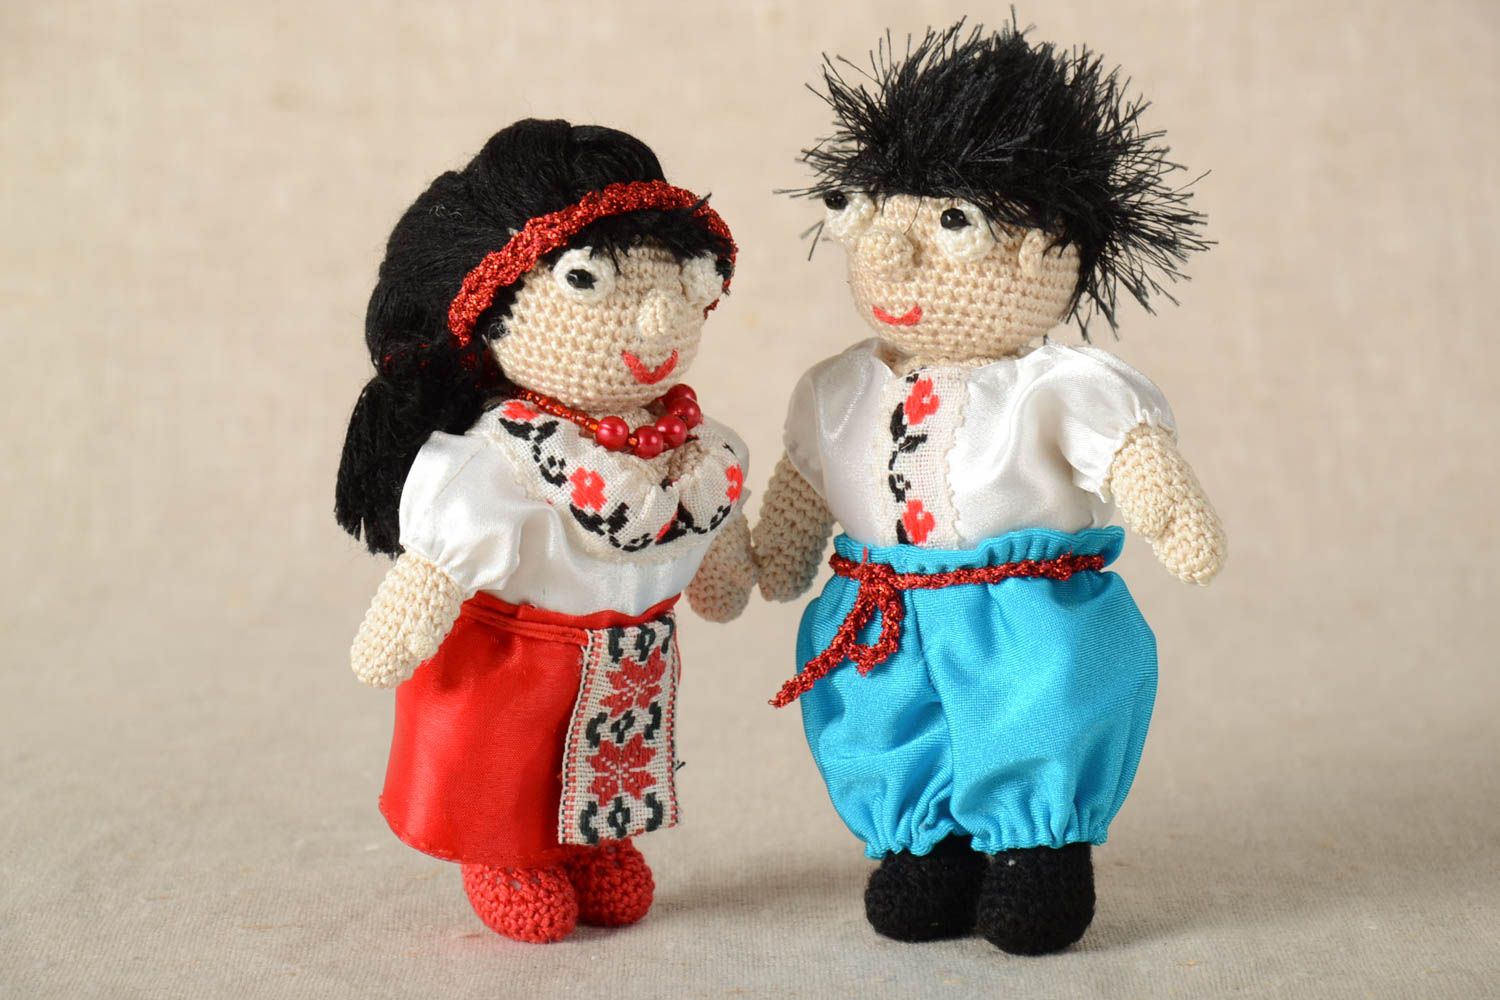 Handmade crocheted toys stylish presents for kids unusual textile toys photo 1